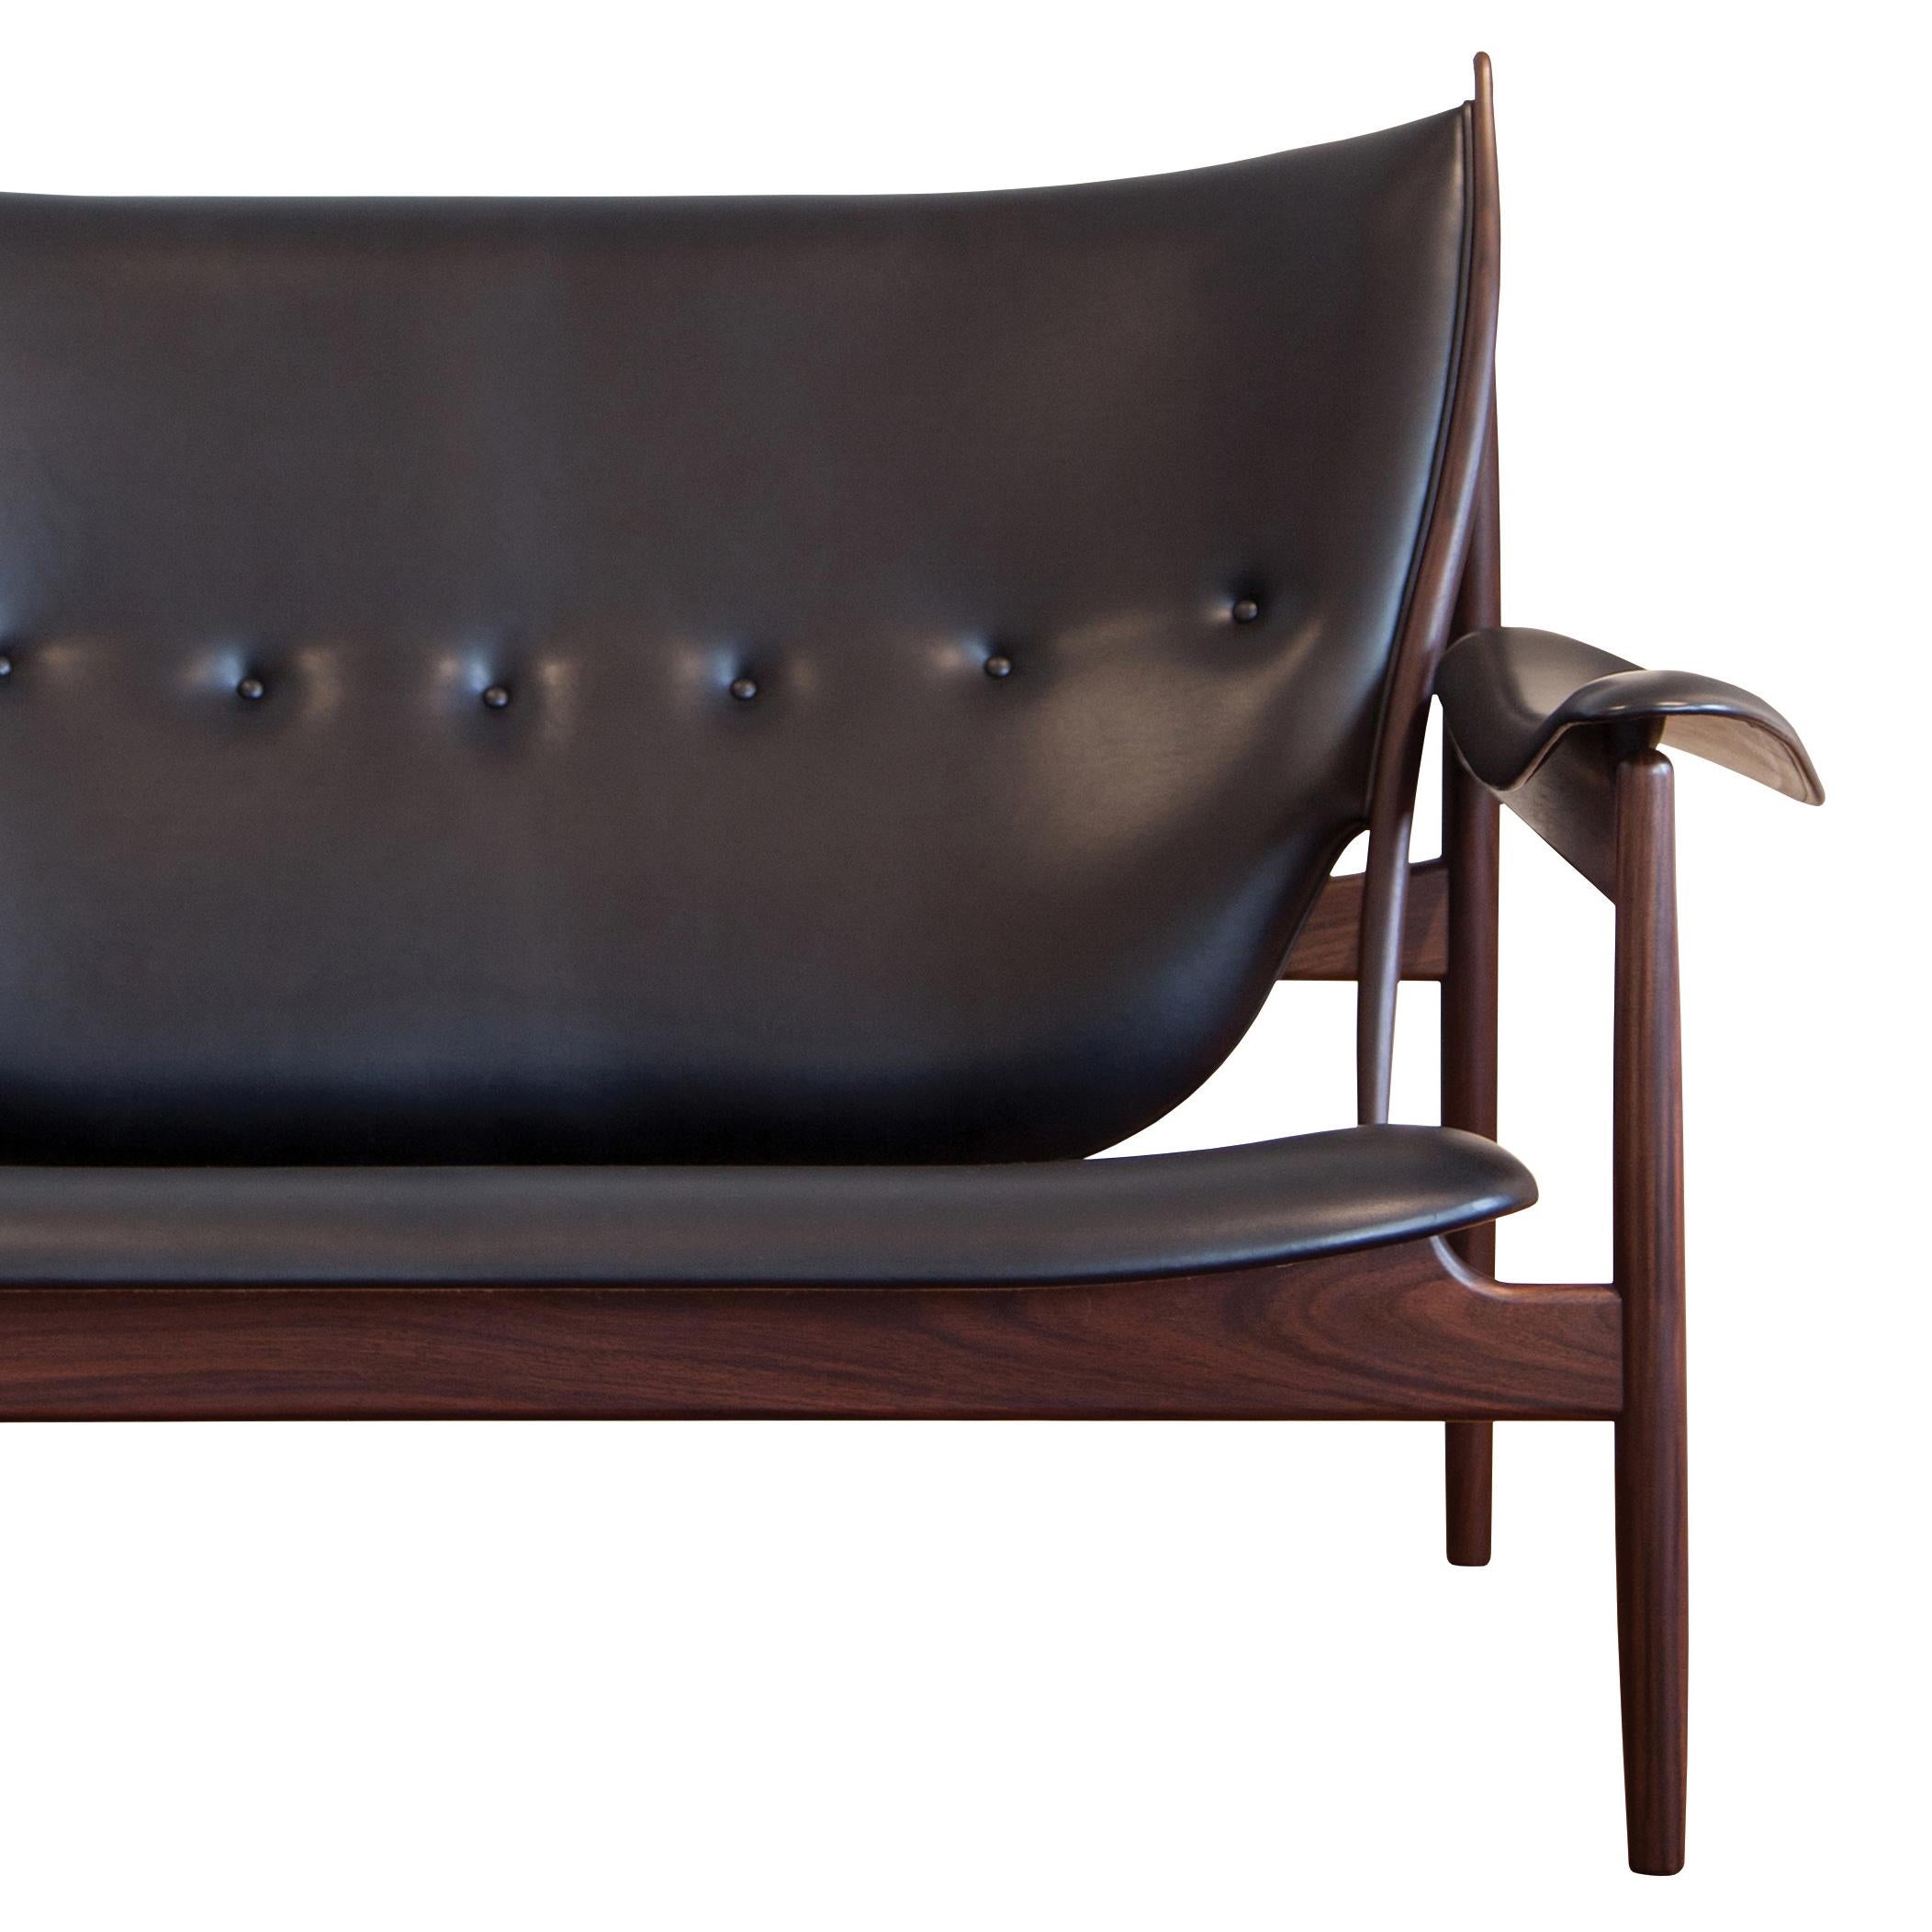 Danish Finn Juhl Chieftain Sofa Couch Wood and Leather